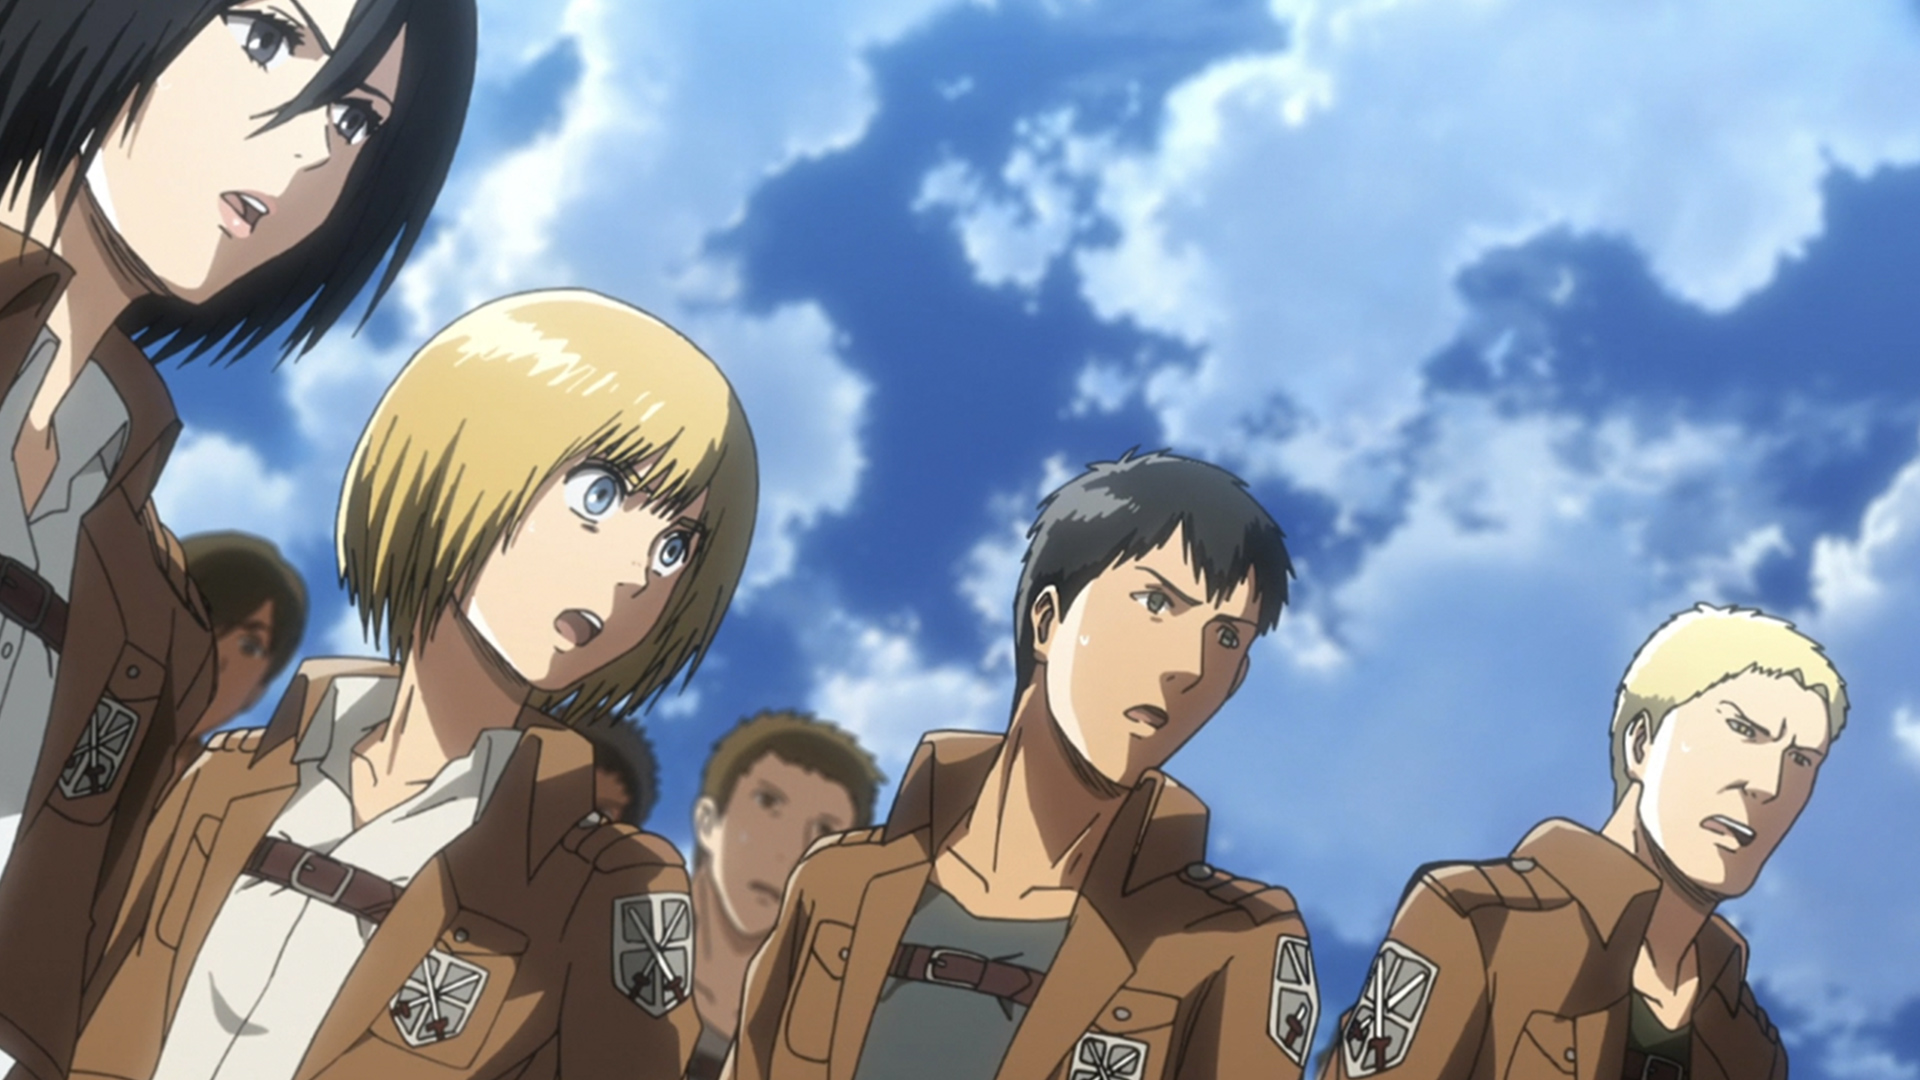 Main characters from Attack on Titan